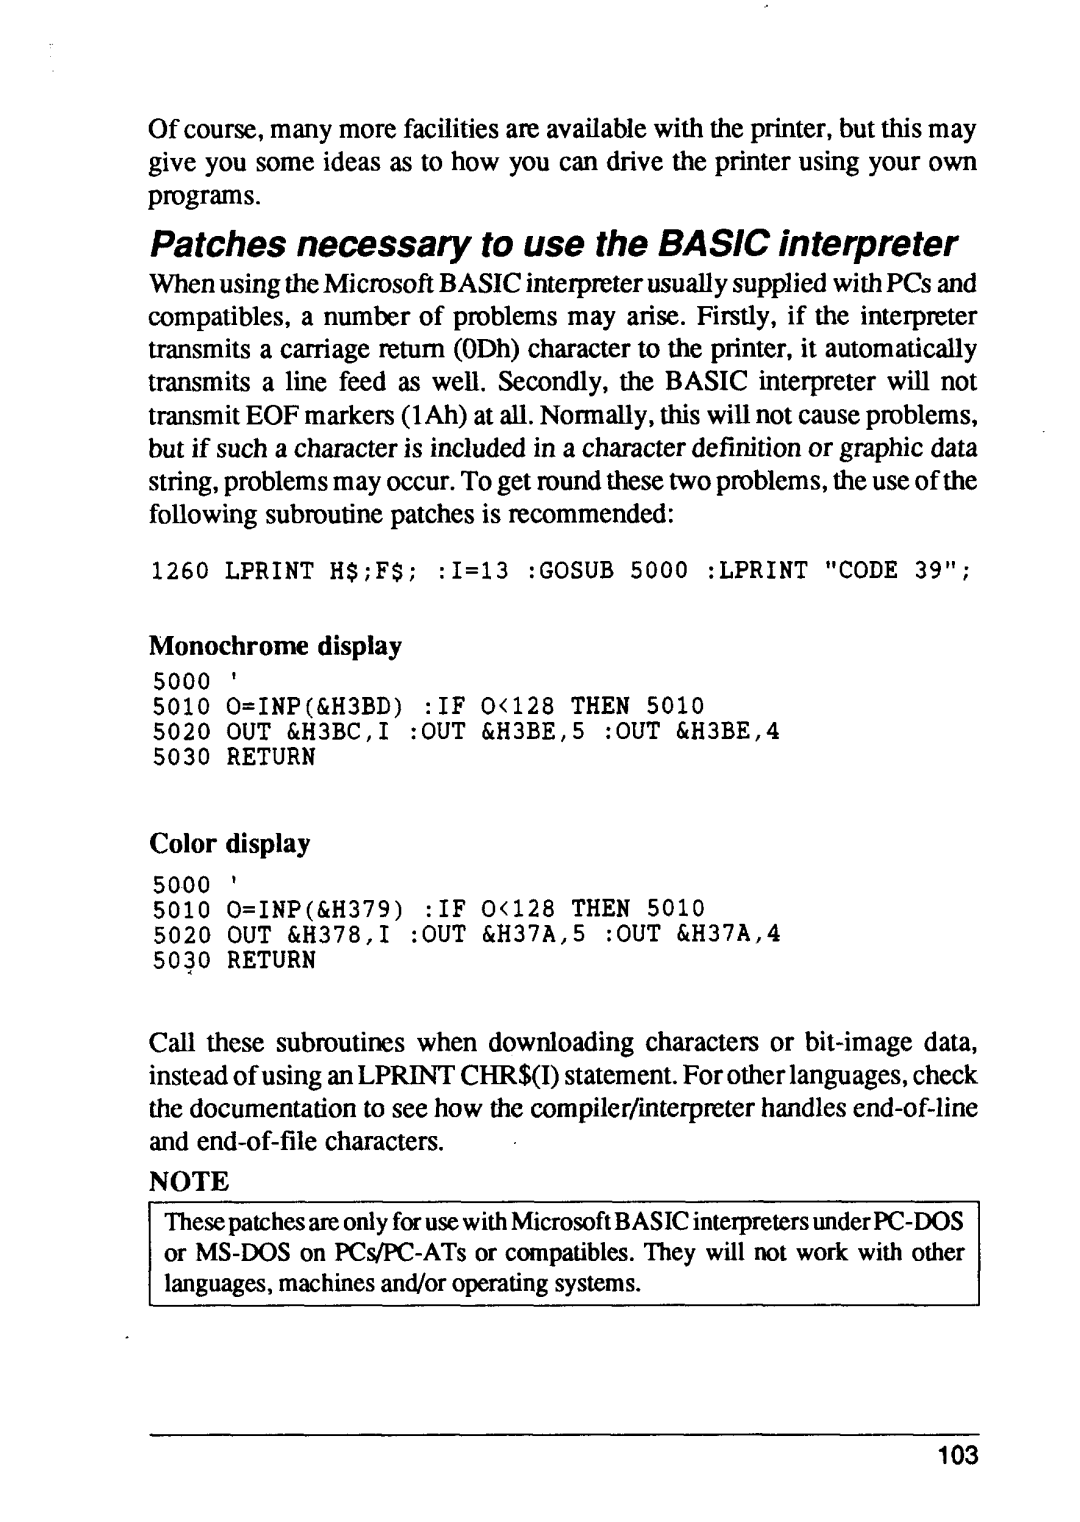 Star Micronics XB24-15, XB24-10 Patches necessary to use the BASIC interpreter, Monochrome display, Color display 